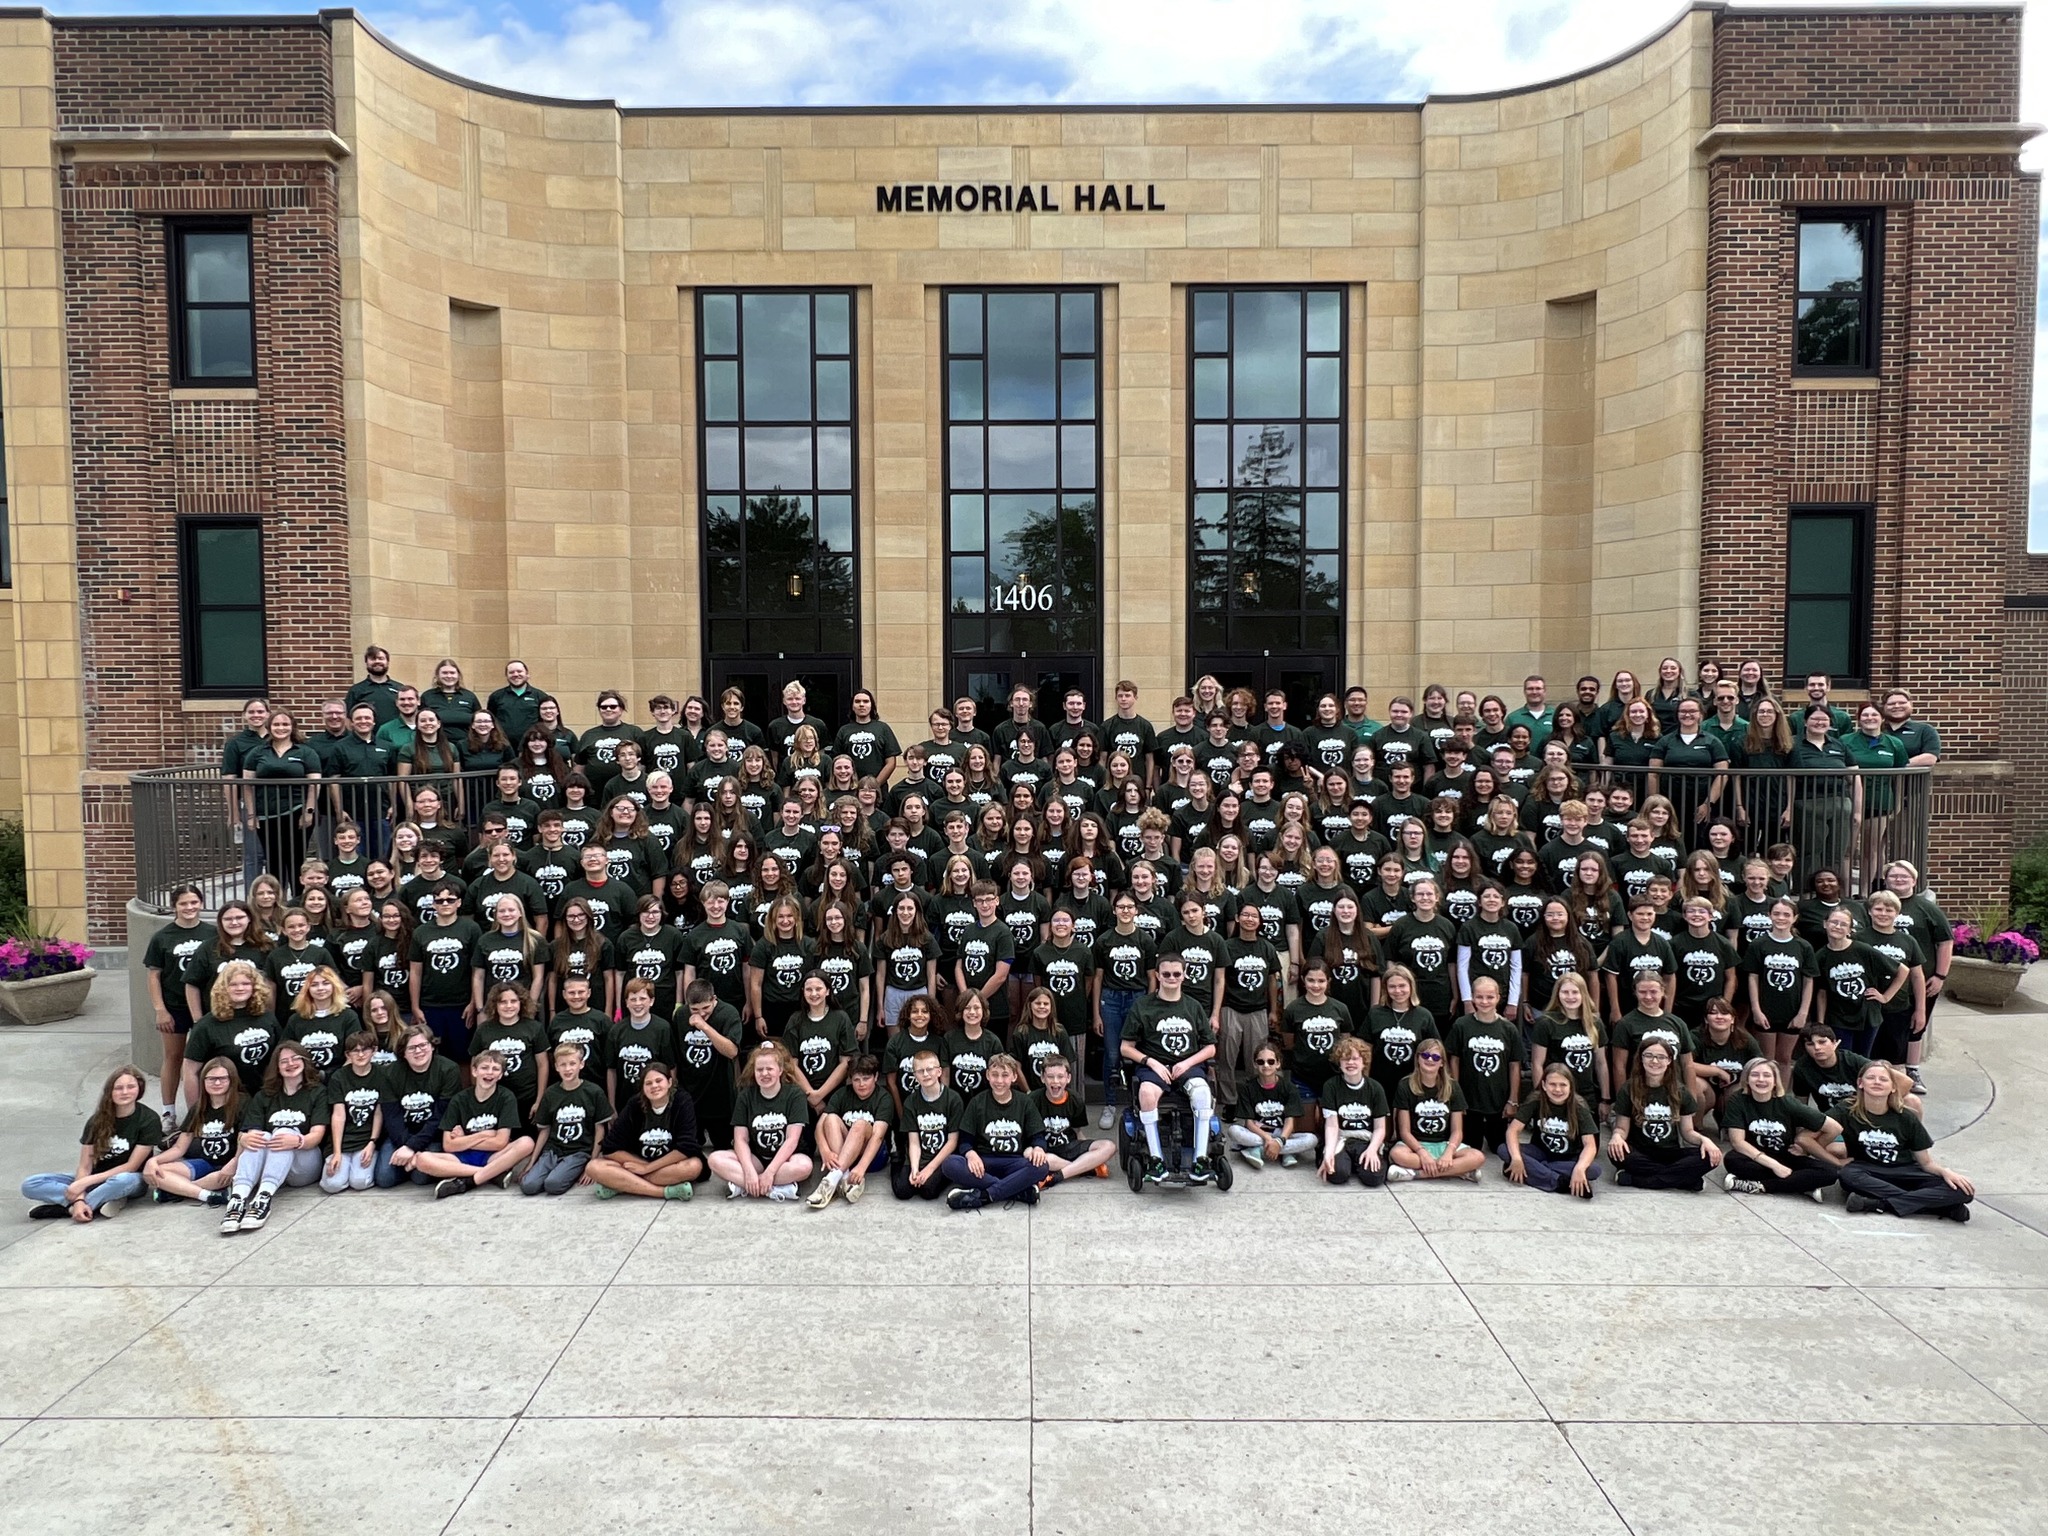 A total of 182 campers attended MusiCamp for its 75th anniversary from July 16-22, 2023, on the Bemidji State University campus. (Contributed)